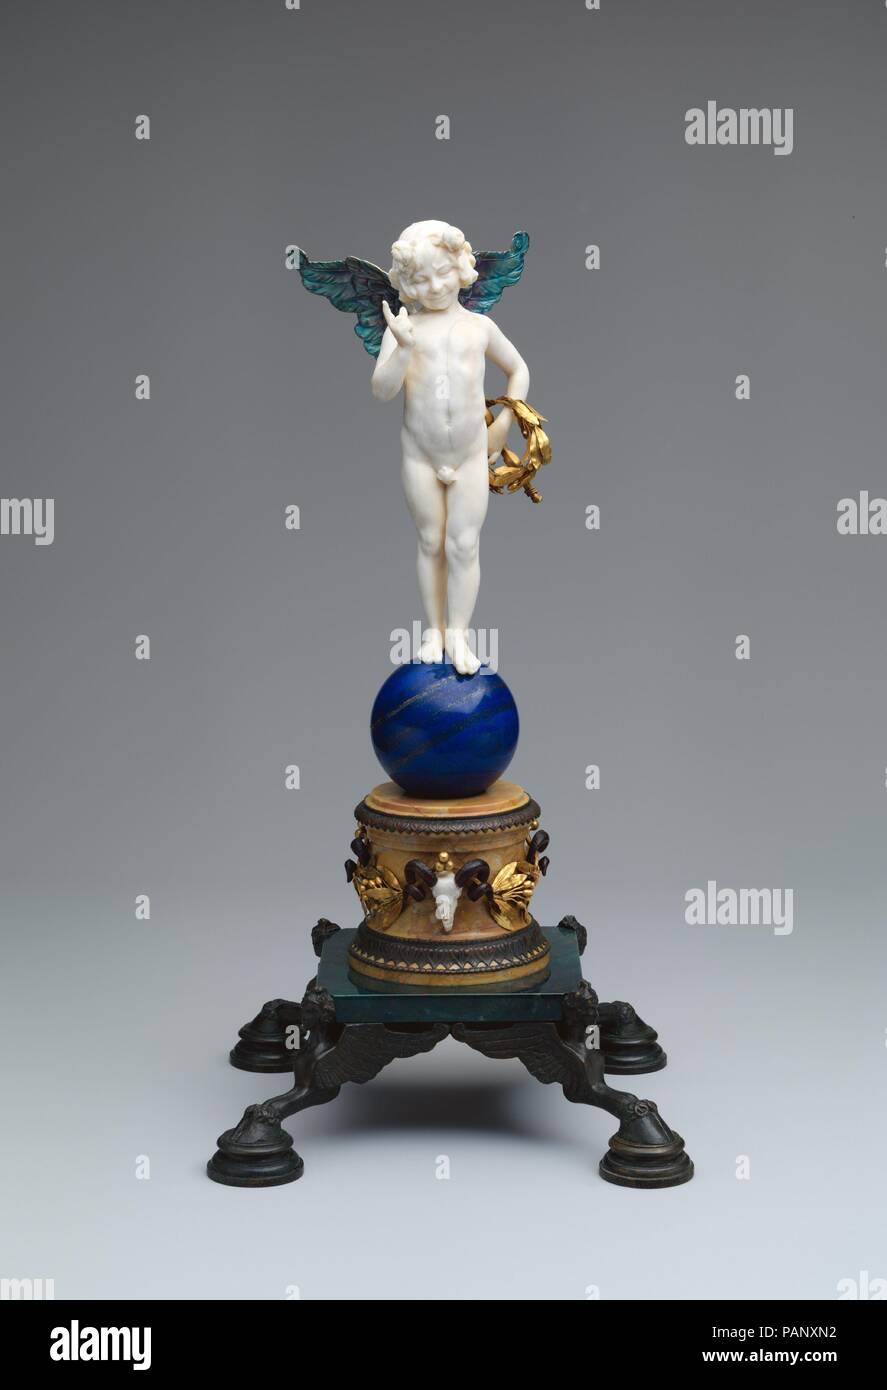 Cupid. Artist: Frederick William MacMonnies (American, New York 1863-1937 New York). Dimensions: 16 1/8 in. height (41 cm) x  8 3/8 in. width (21.3 cm.) x 8 1/4 in. depth (21 cm.). Date: 1898.  Along with a number of French contemporaries, Paris-based MacMonnies participated in a late-nineteenth-century revival of interest in polychromy and mixed materials for sculpture. This unique multi-material object features an intricate play of diverse media: a fanciful carved ivory cupid with enameled silver wings surmounts an elaborate base incorporating colored stones, gold, bronze, and wood. MacMonni Stock Photo